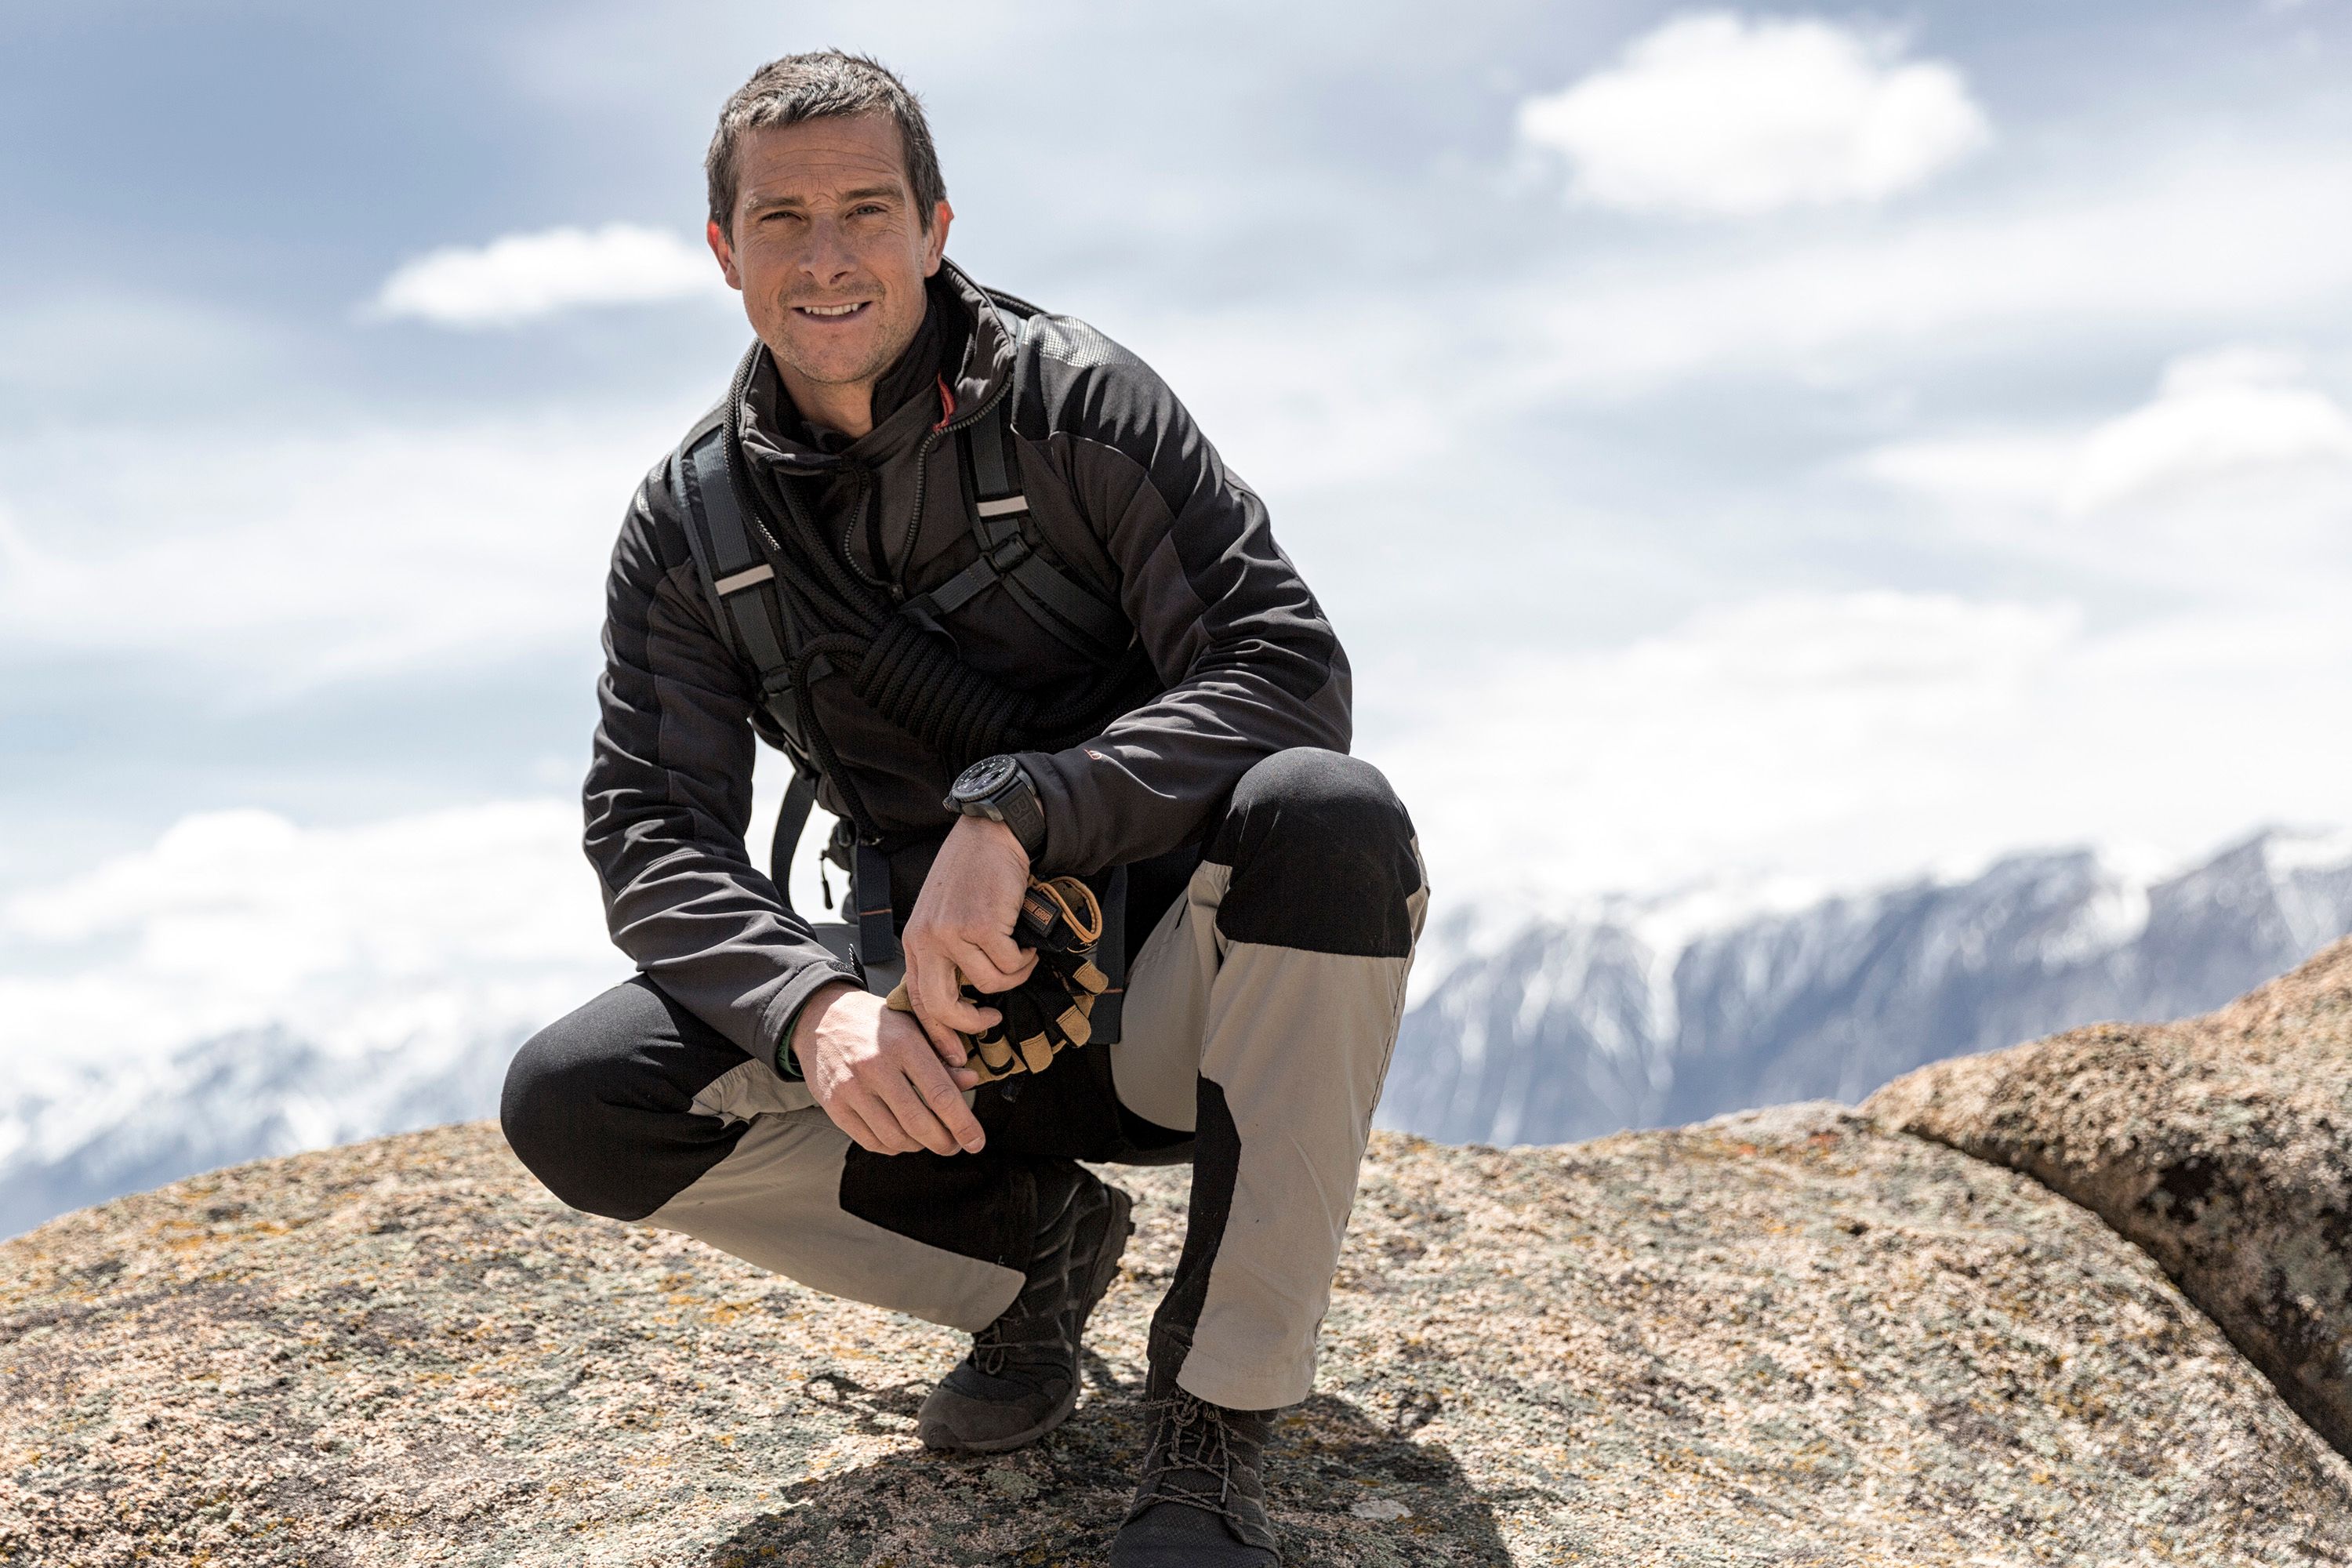 Bear Grylls in the middle of filming his series "Running Wild with Bear Grylls" in 2016. I Image: Getty Images.